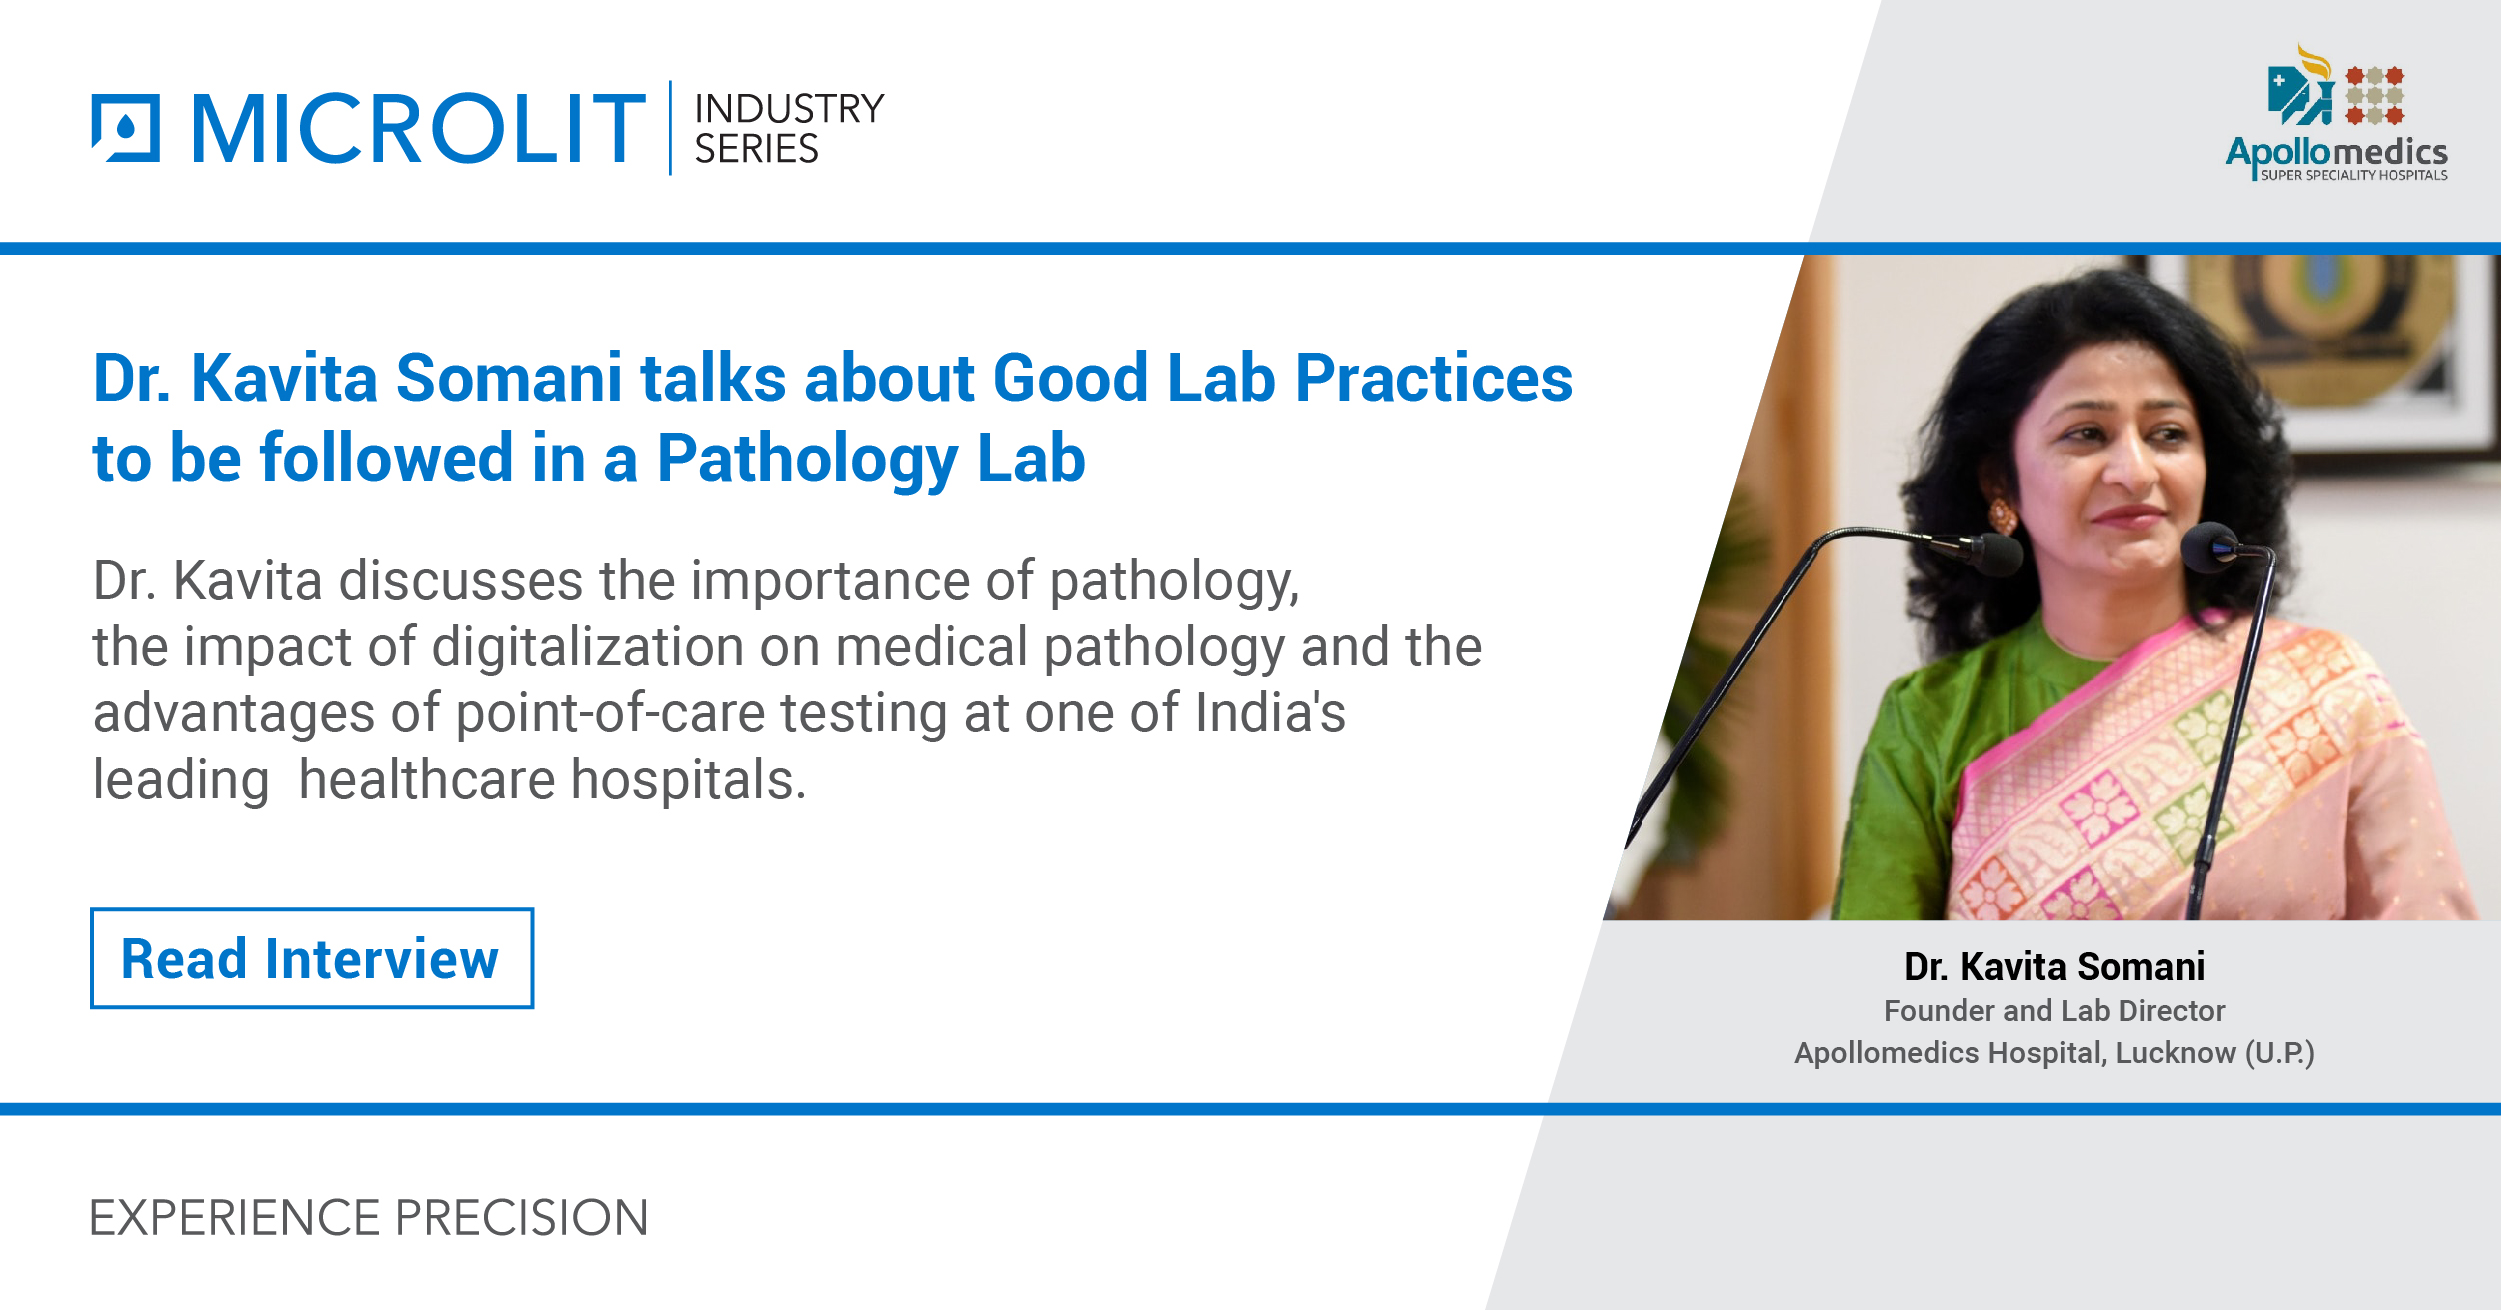 Dr Kavita discusses about Good Lab Practices, Importance of Pathology and Impact of Digitalization on Medical Pathology and much more